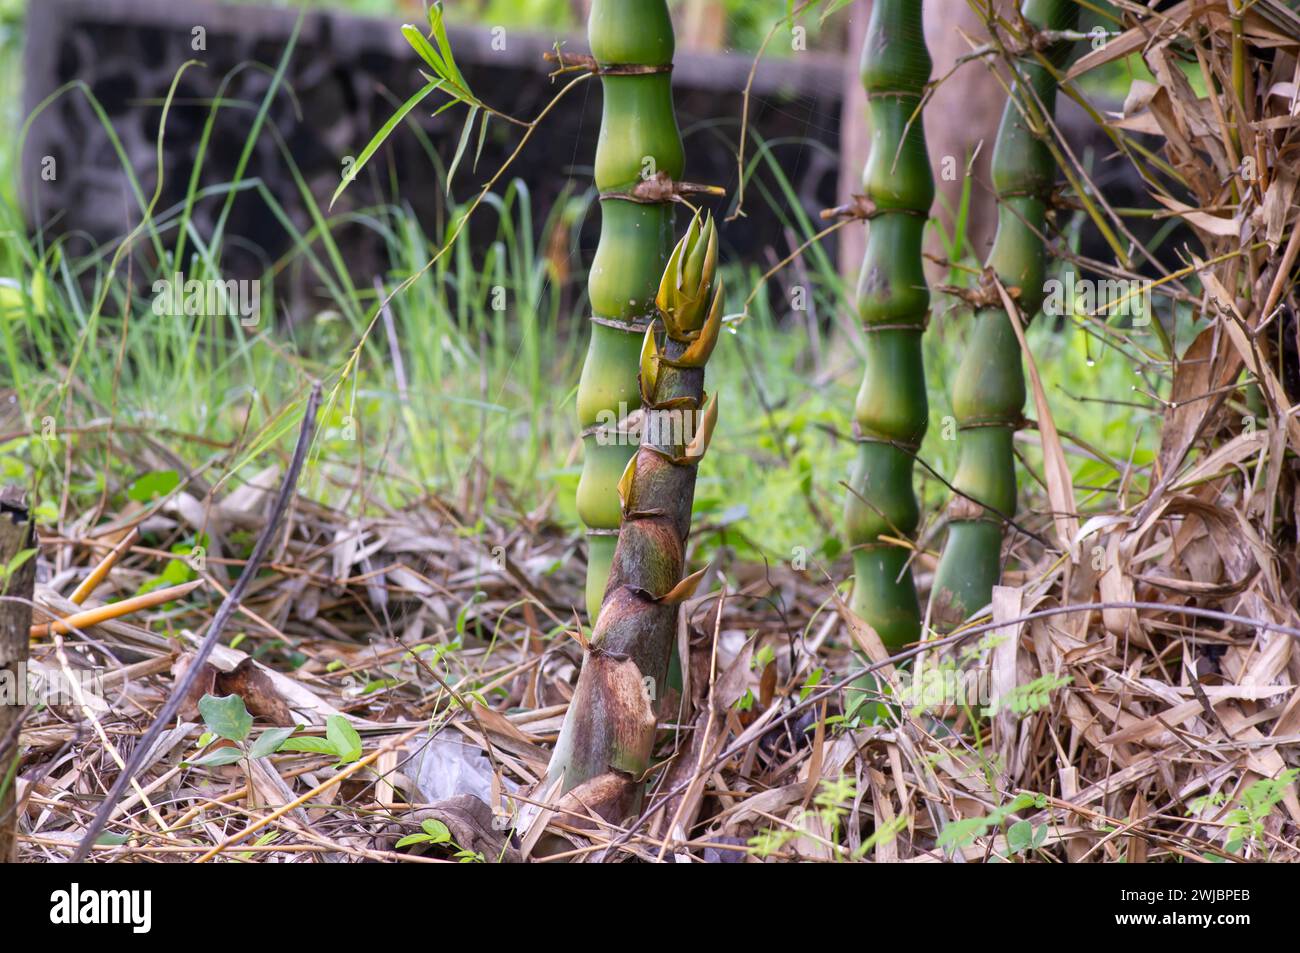 A young and full size Buddha Belly Bamboo trees (Bambusa ventricosa) in the forest in Gunung Kidul, Yogyakarta, Indonesia. Stock Photo